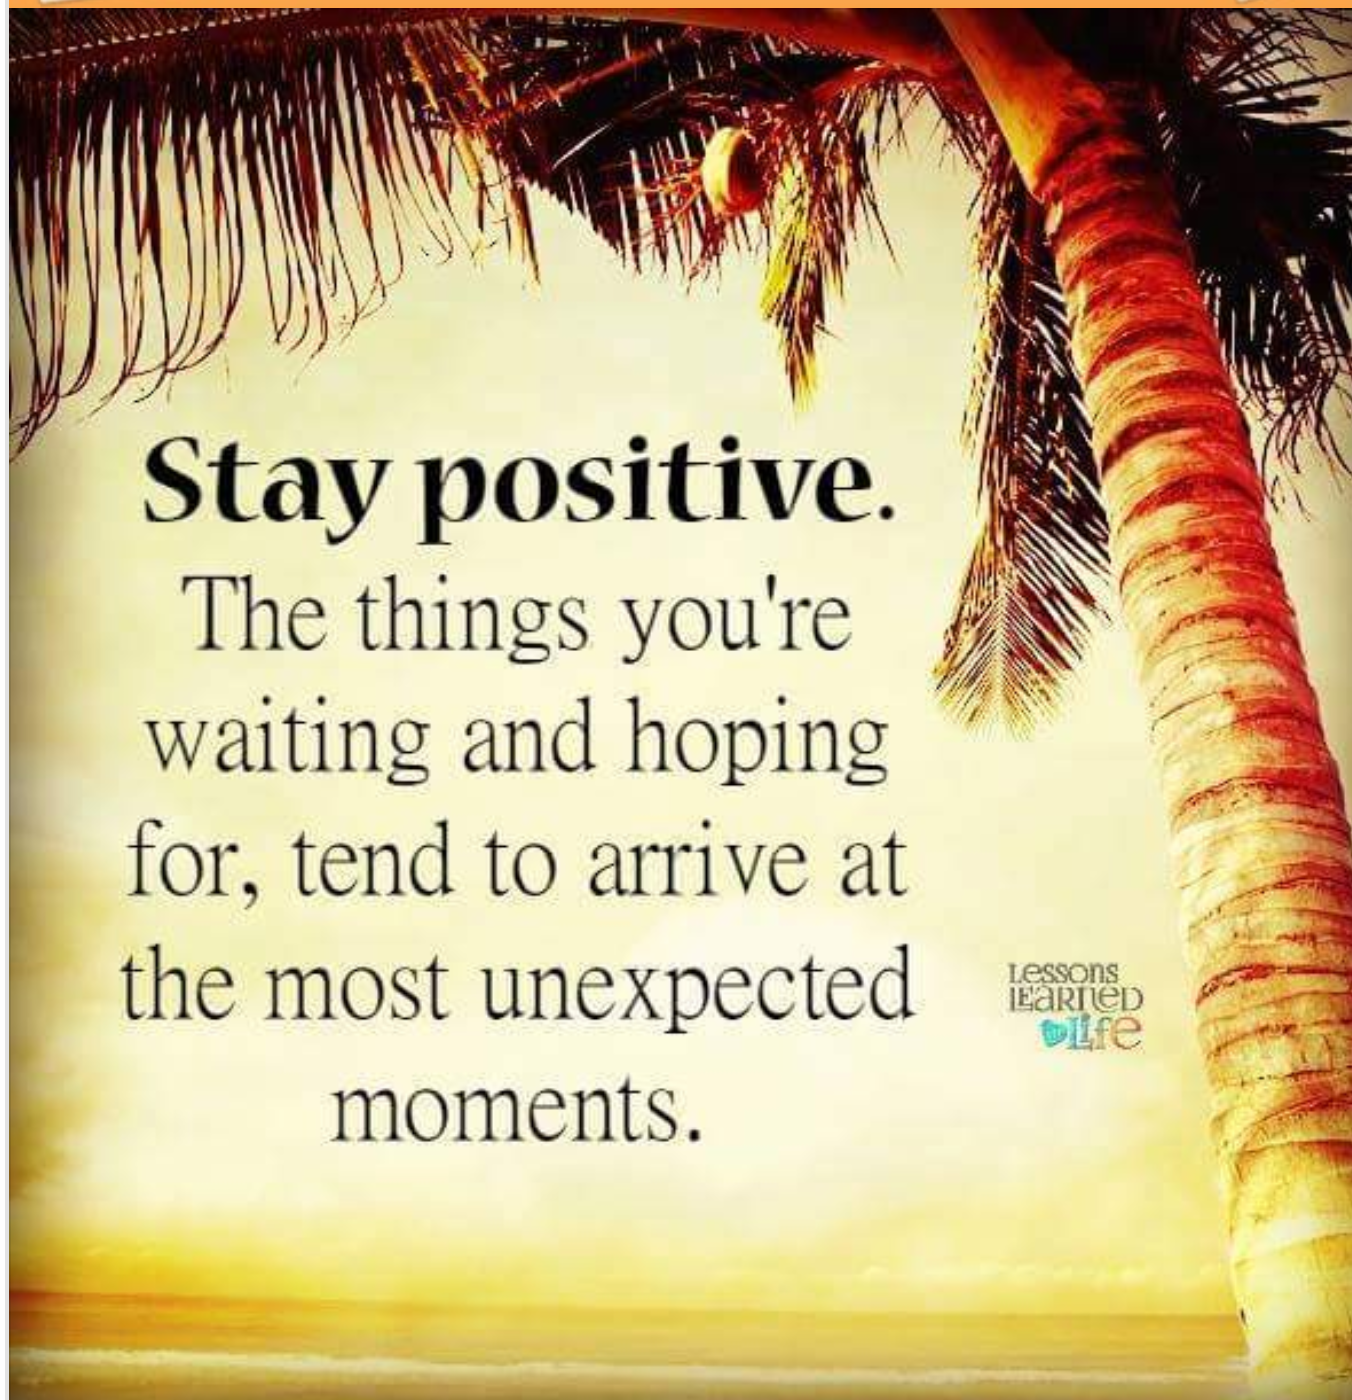 Stay positive. Staying my life